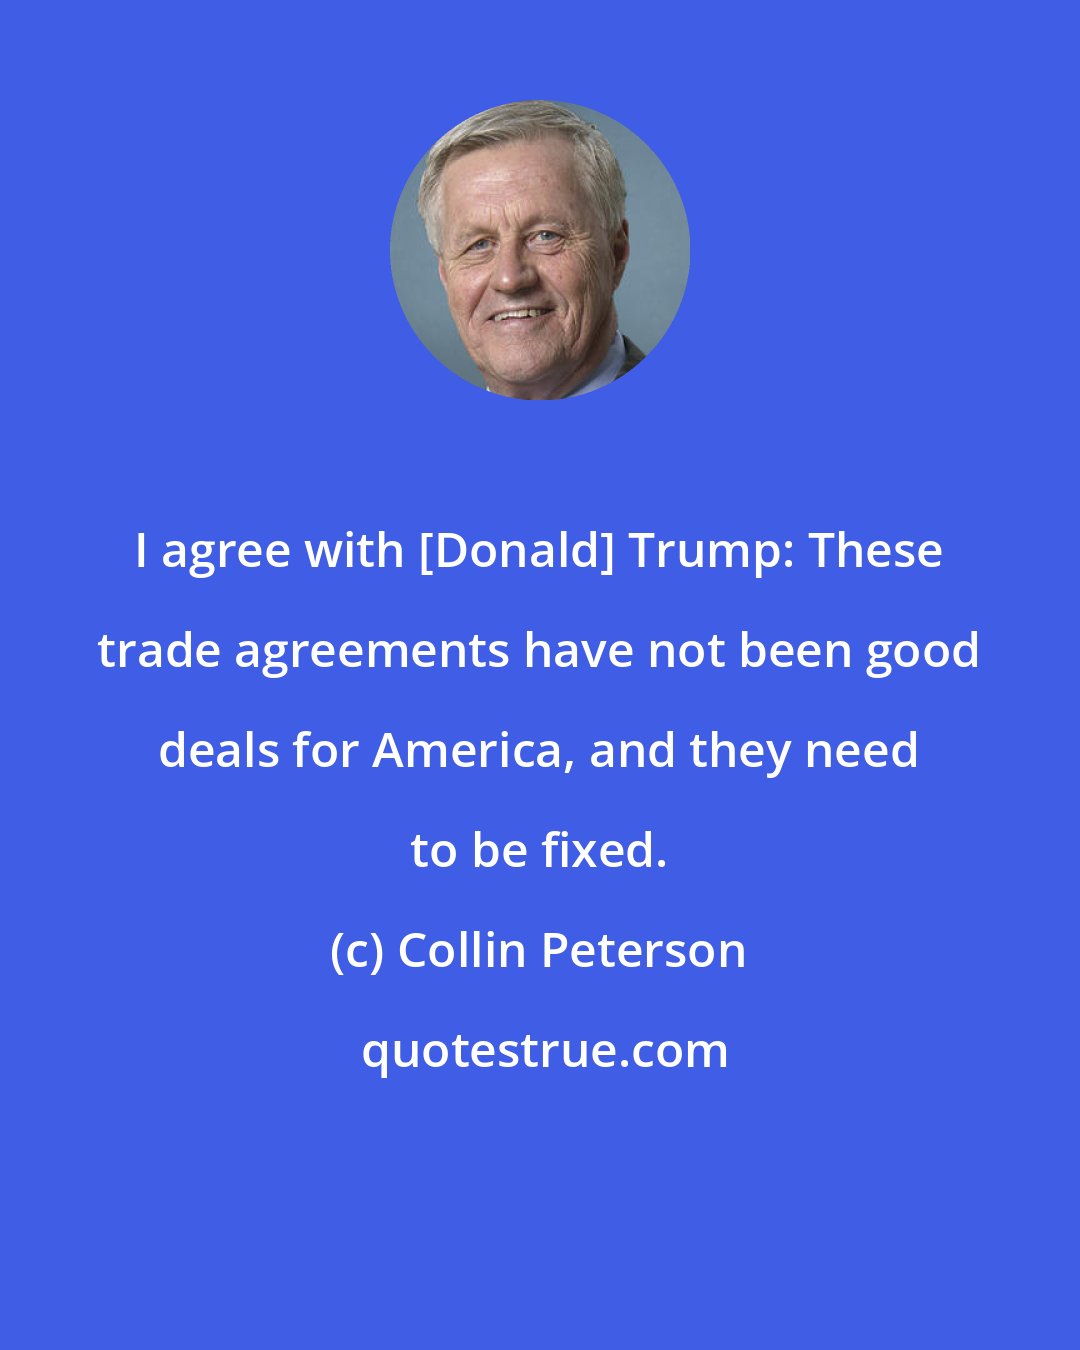 Collin Peterson: I agree with [Donald] Trump: These trade agreements have not been good deals for America, and they need to be fixed.